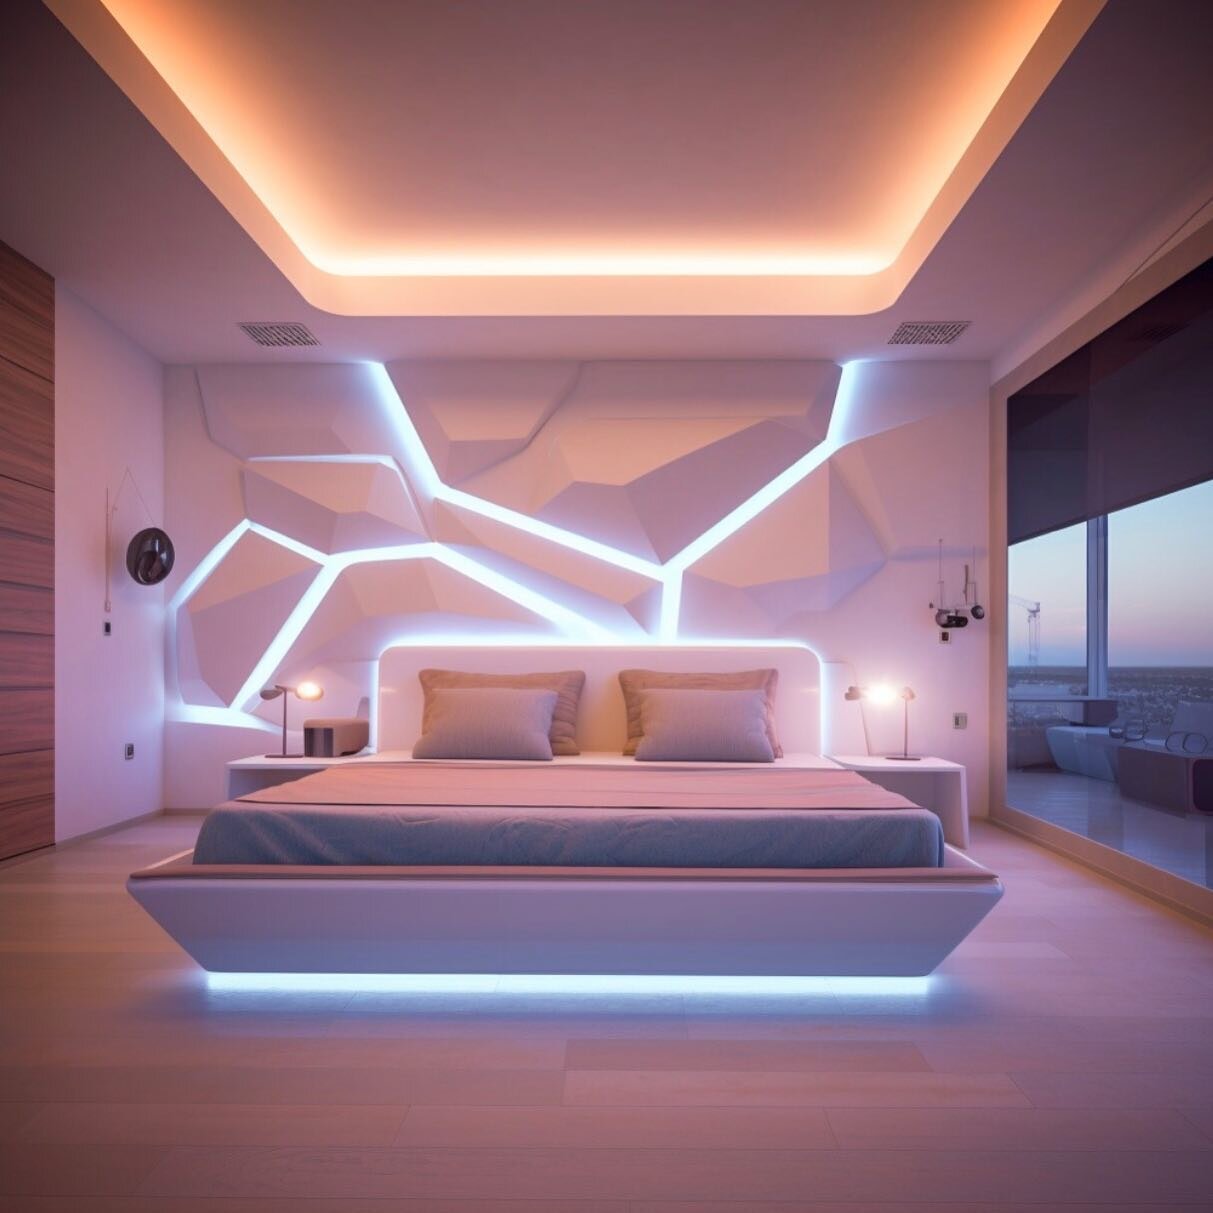 SUNSETIZED ROCKS 🌄🛥. Yacht interior design. Introducing our latest yacht suites design: sleek white surfaces, warm ambiance, and custom organic 3D patterns with illuminating elements. Experience the design language, vibes and sunset gradient palett